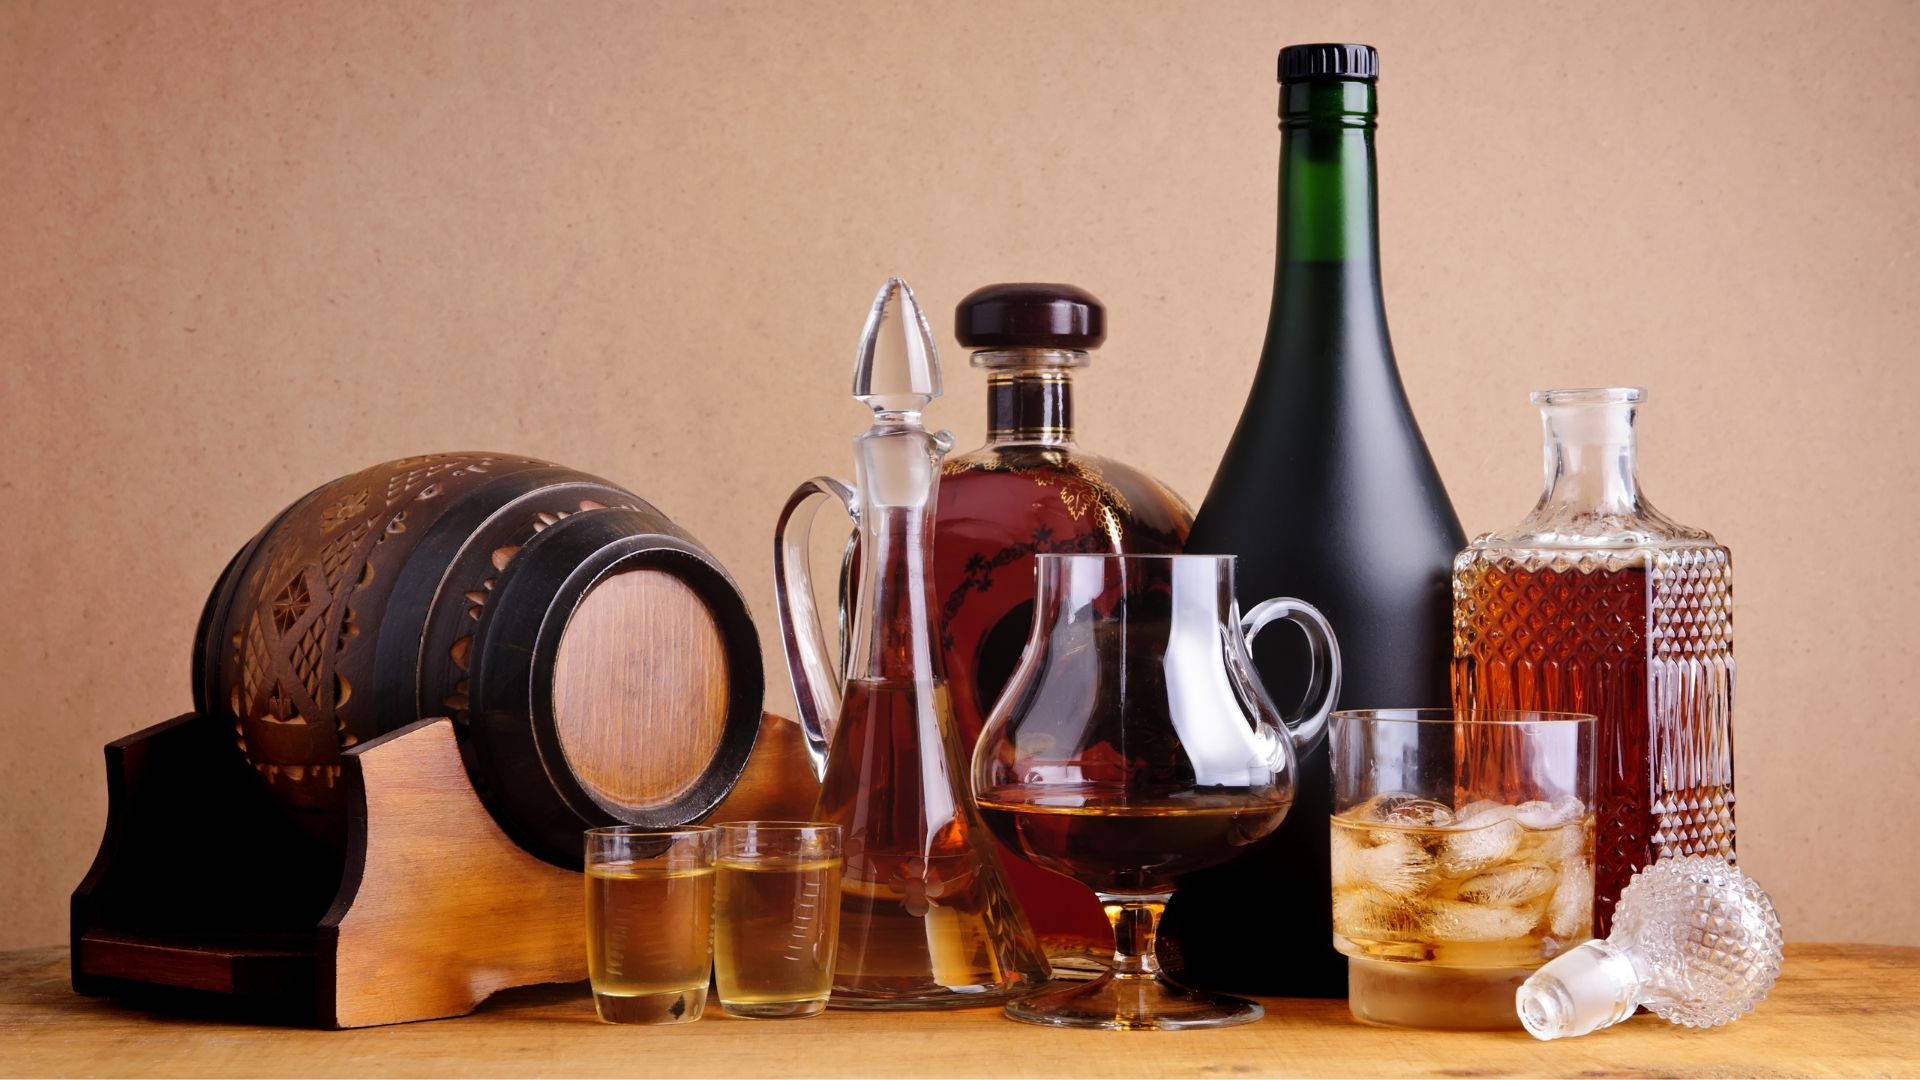 Different Drinking Alcohol With Wooden Barrel Wallpaper